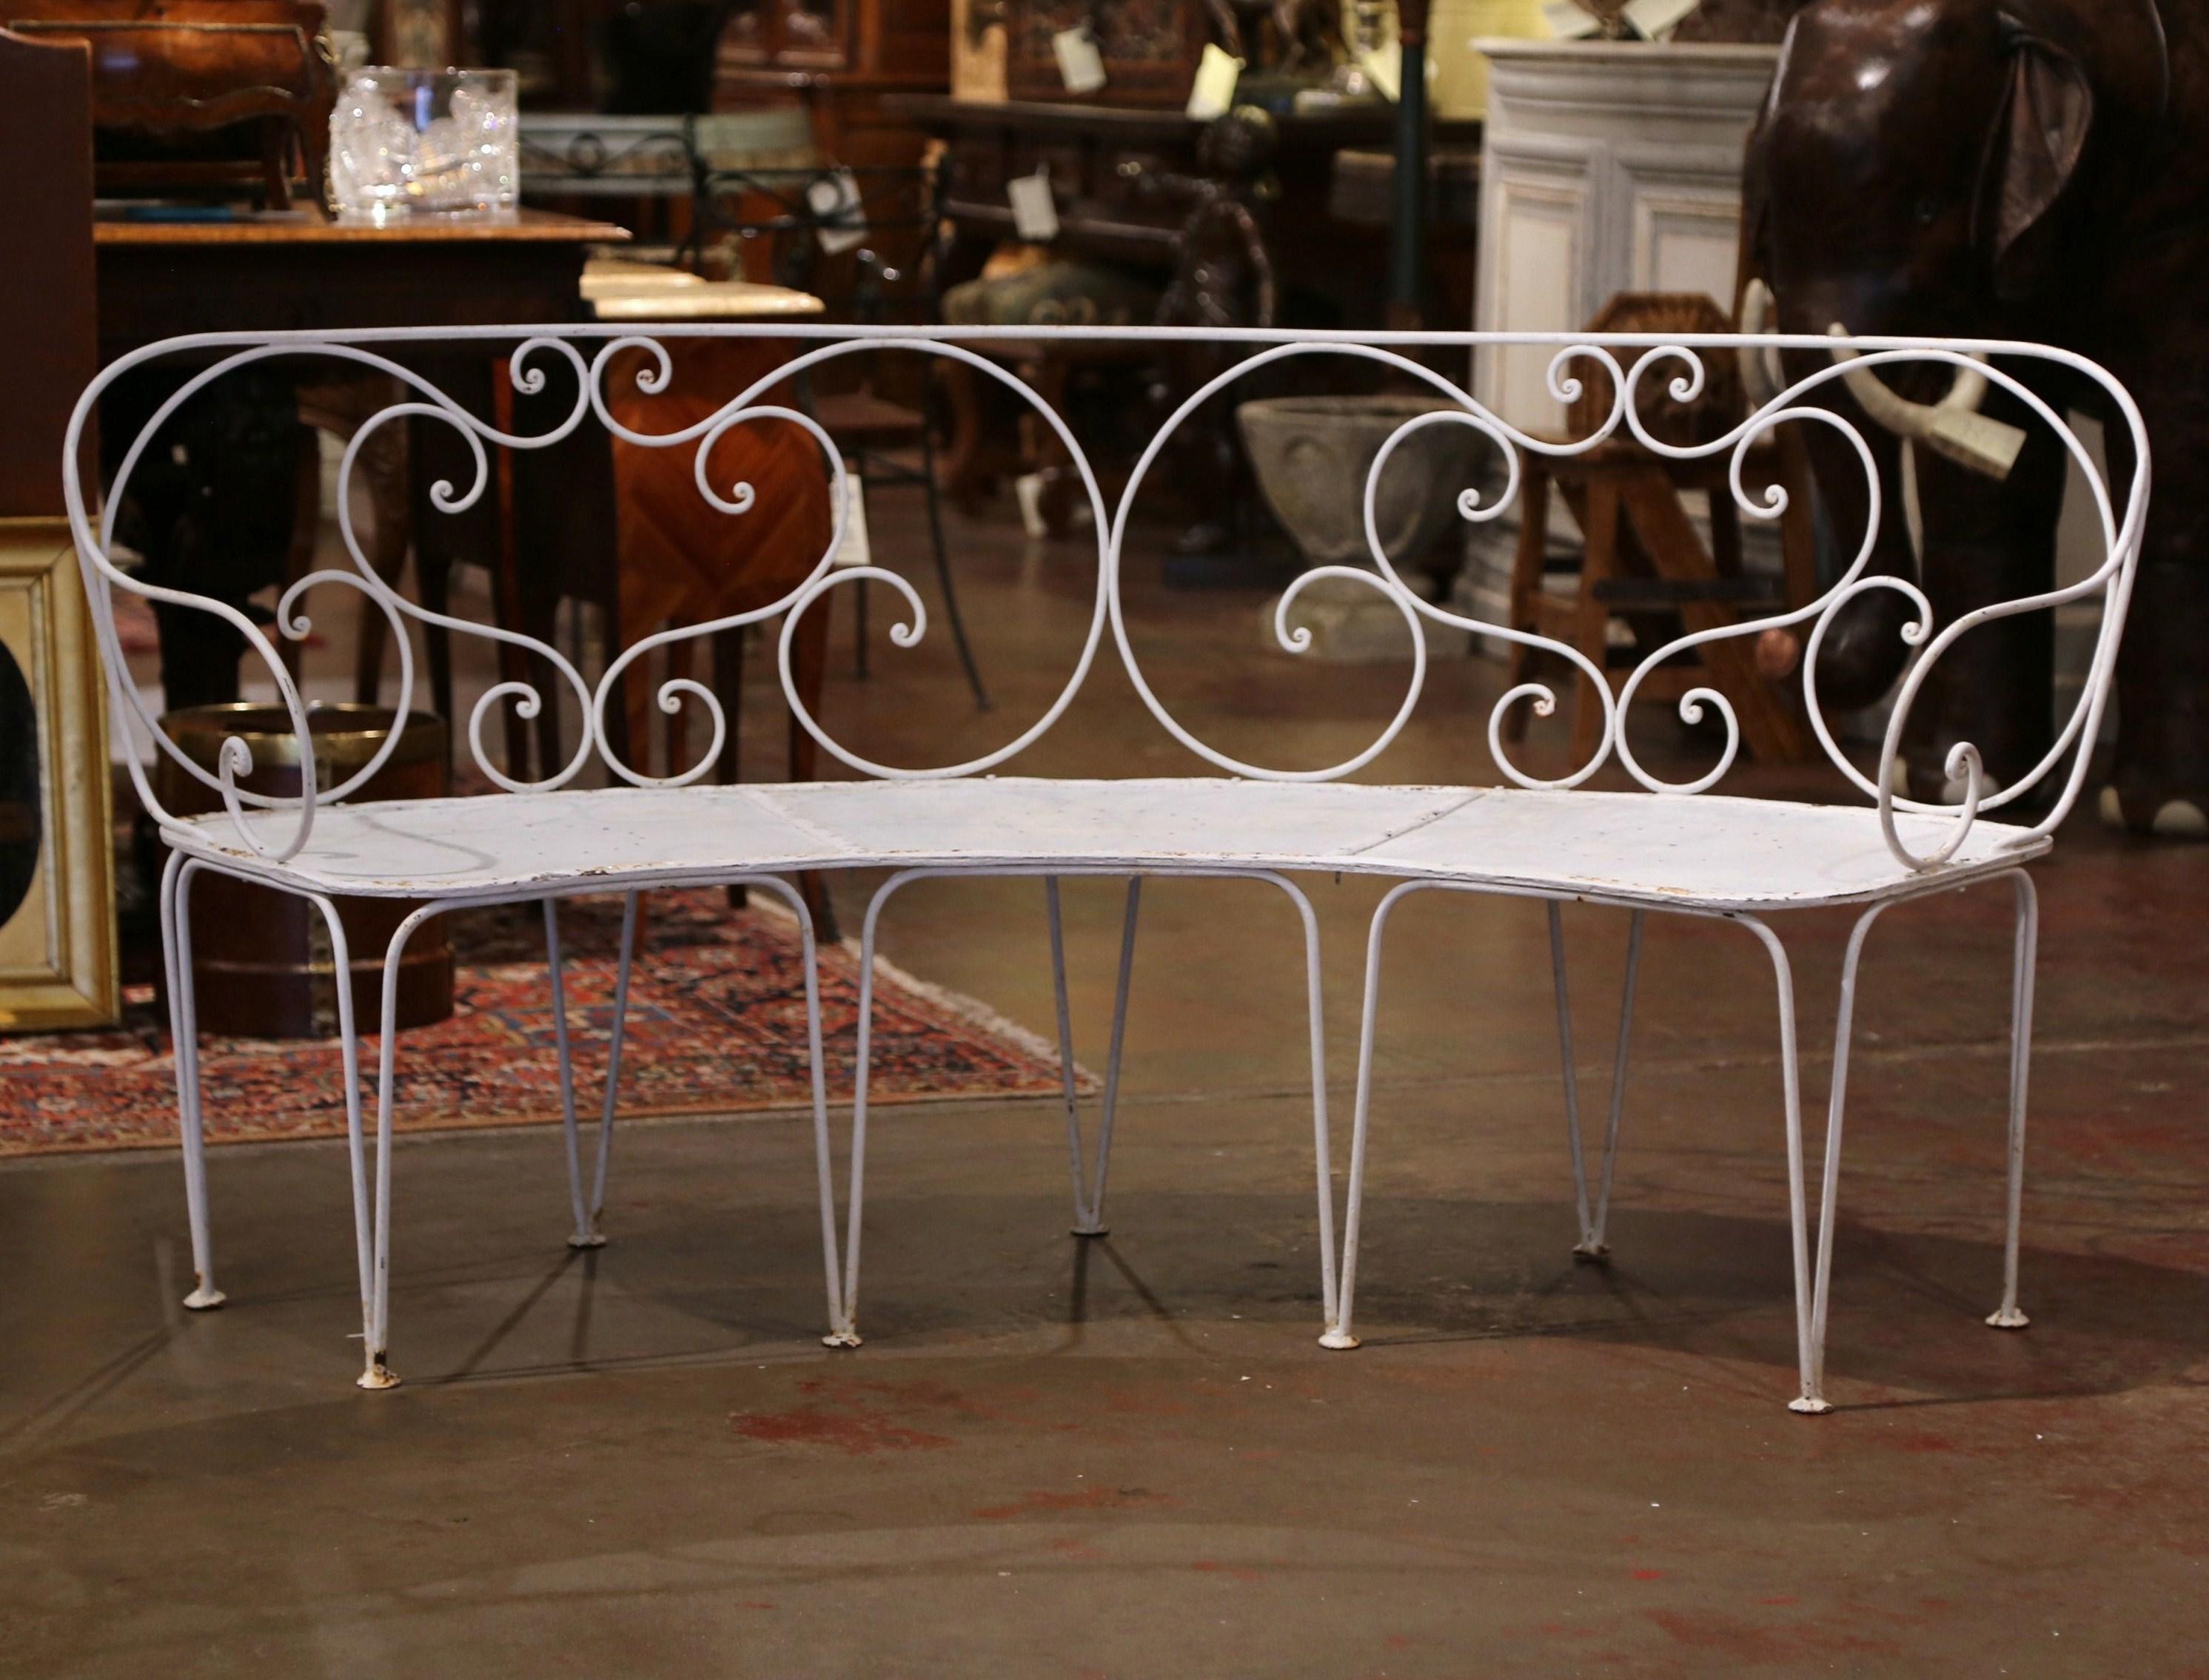 Add extra seating to an outdoor space, porch or patio with this elegant antique iron bench. Crafted in northern France circa 1880, the curved bench sits on nine thin tapered legs and could accommodate three people. The delicate garden bench has